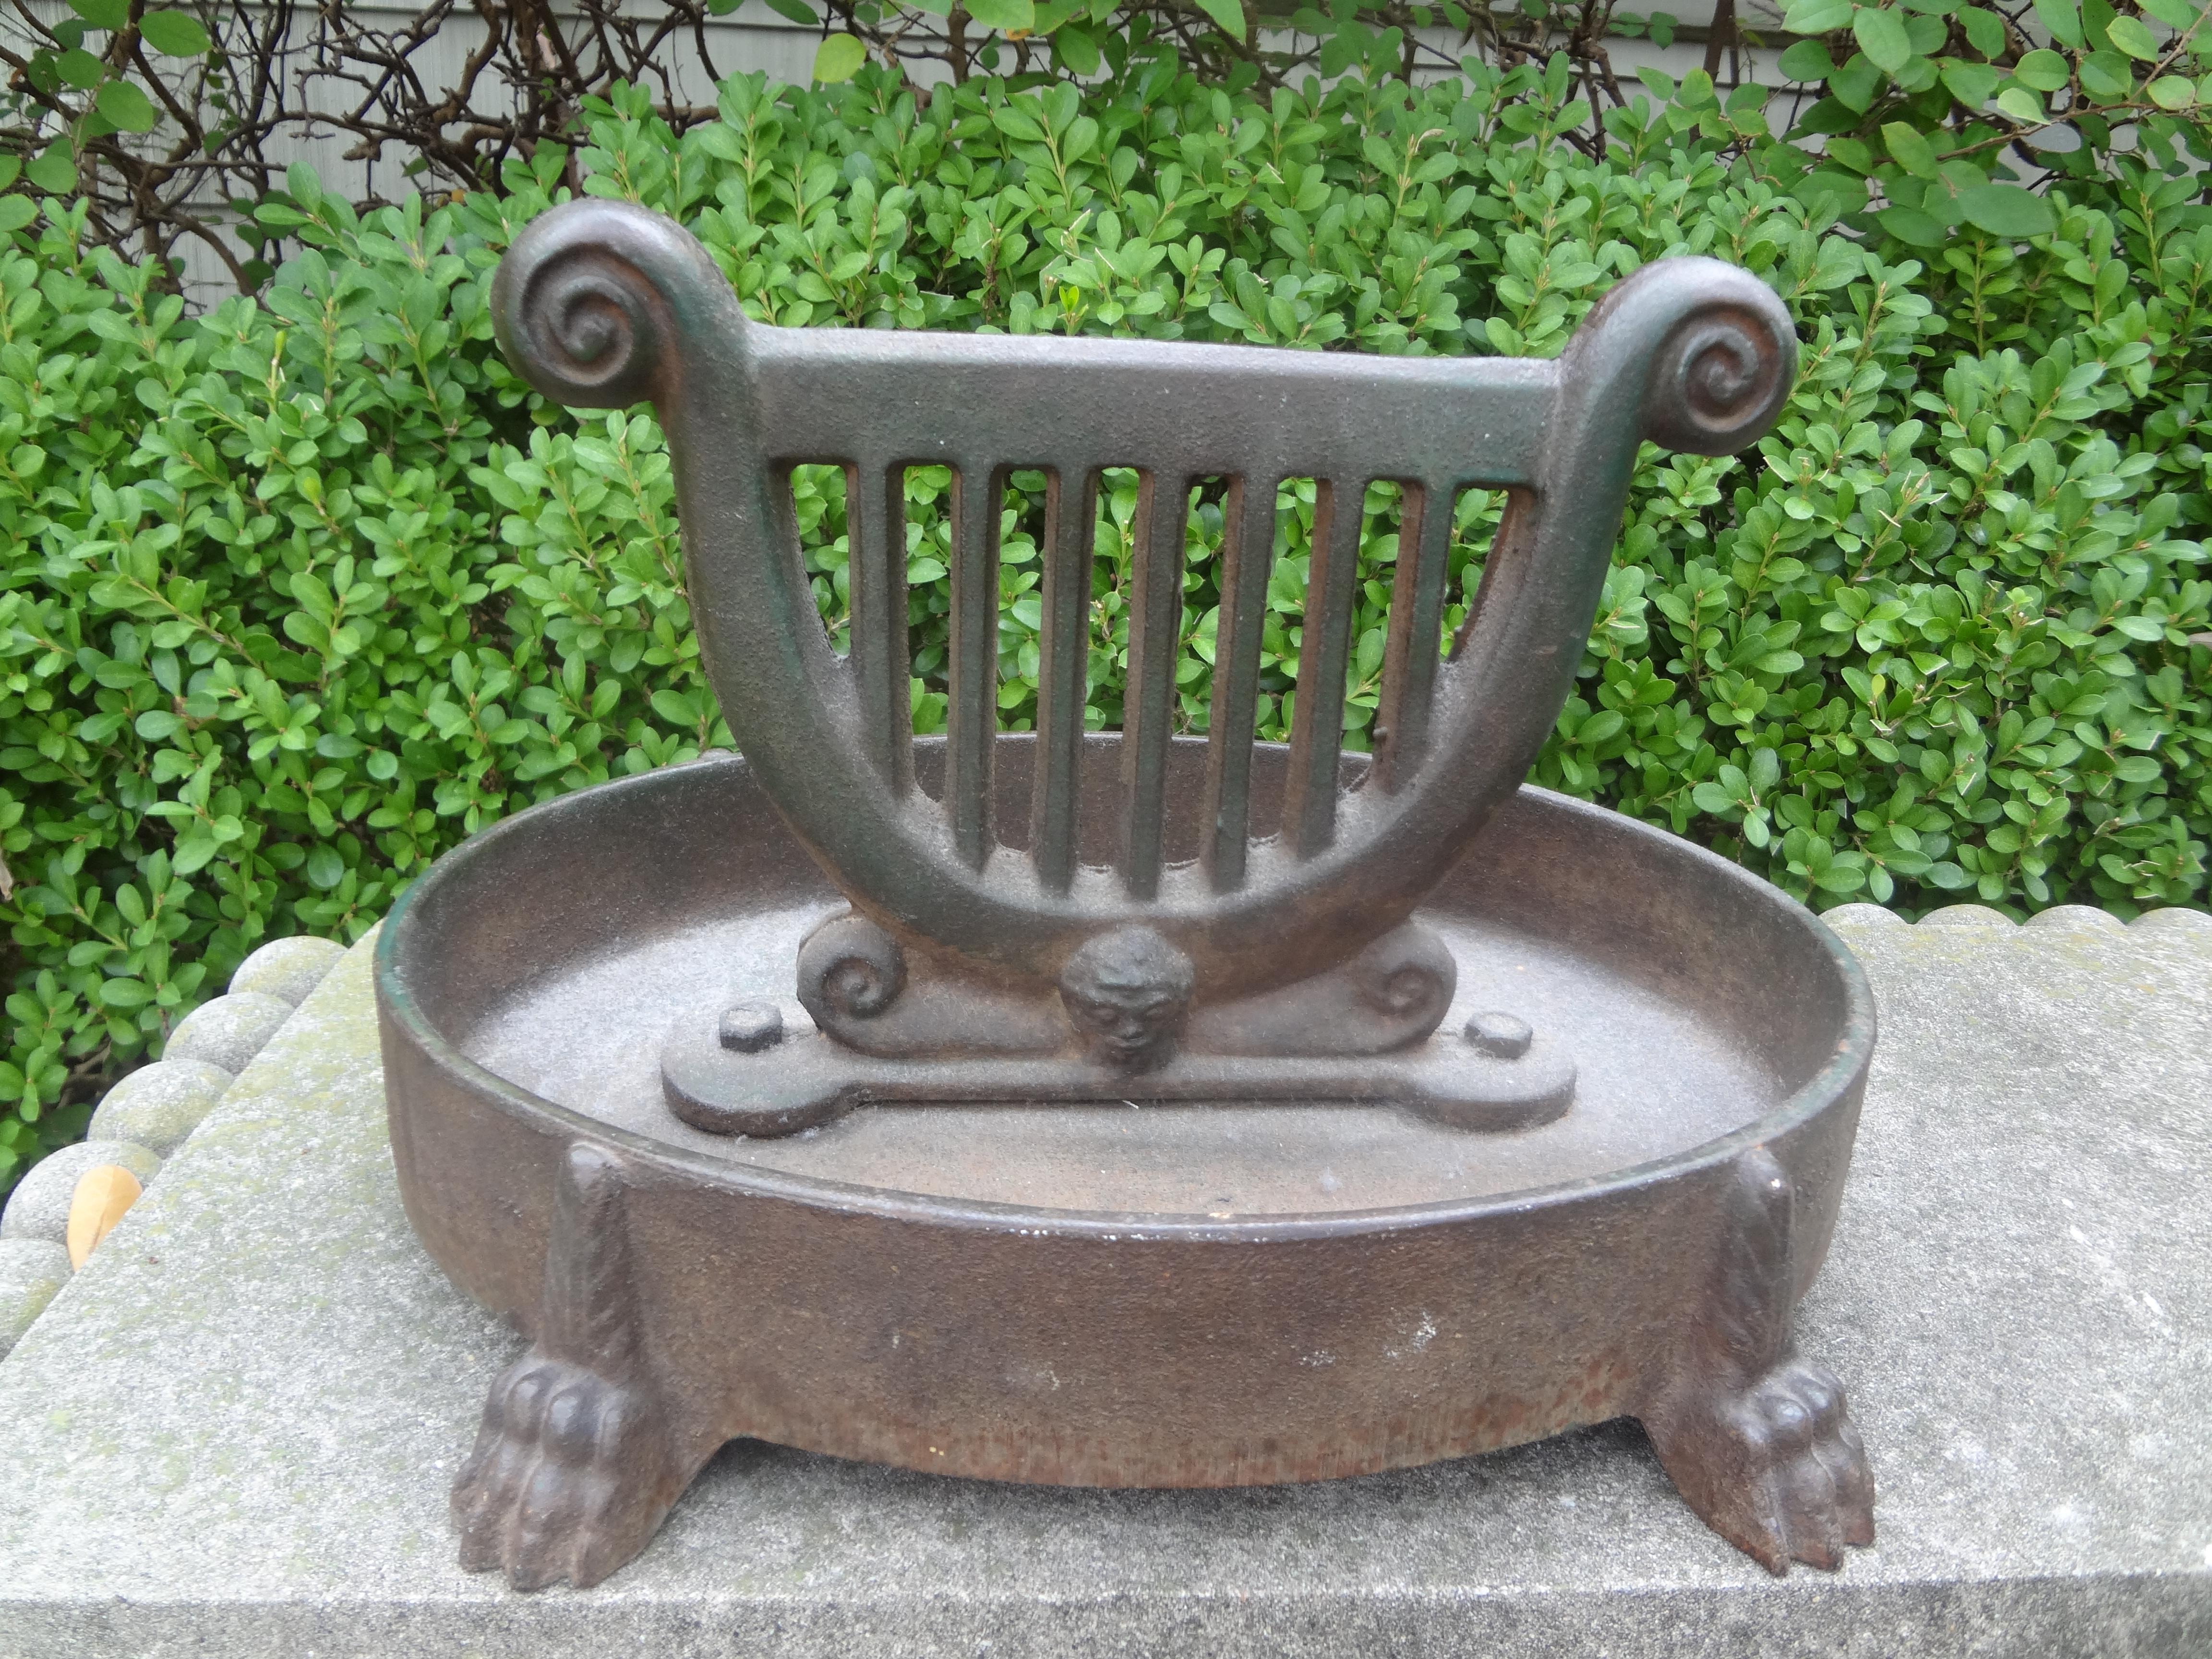 Vintage Continental Neoclassical Style Iron Boot Scraper.
This interesting Neoclassical style cast iron garden boot scraper has a beautiful lyre design a mask and paw feet. Great garden, mud room or bookcase accessory.